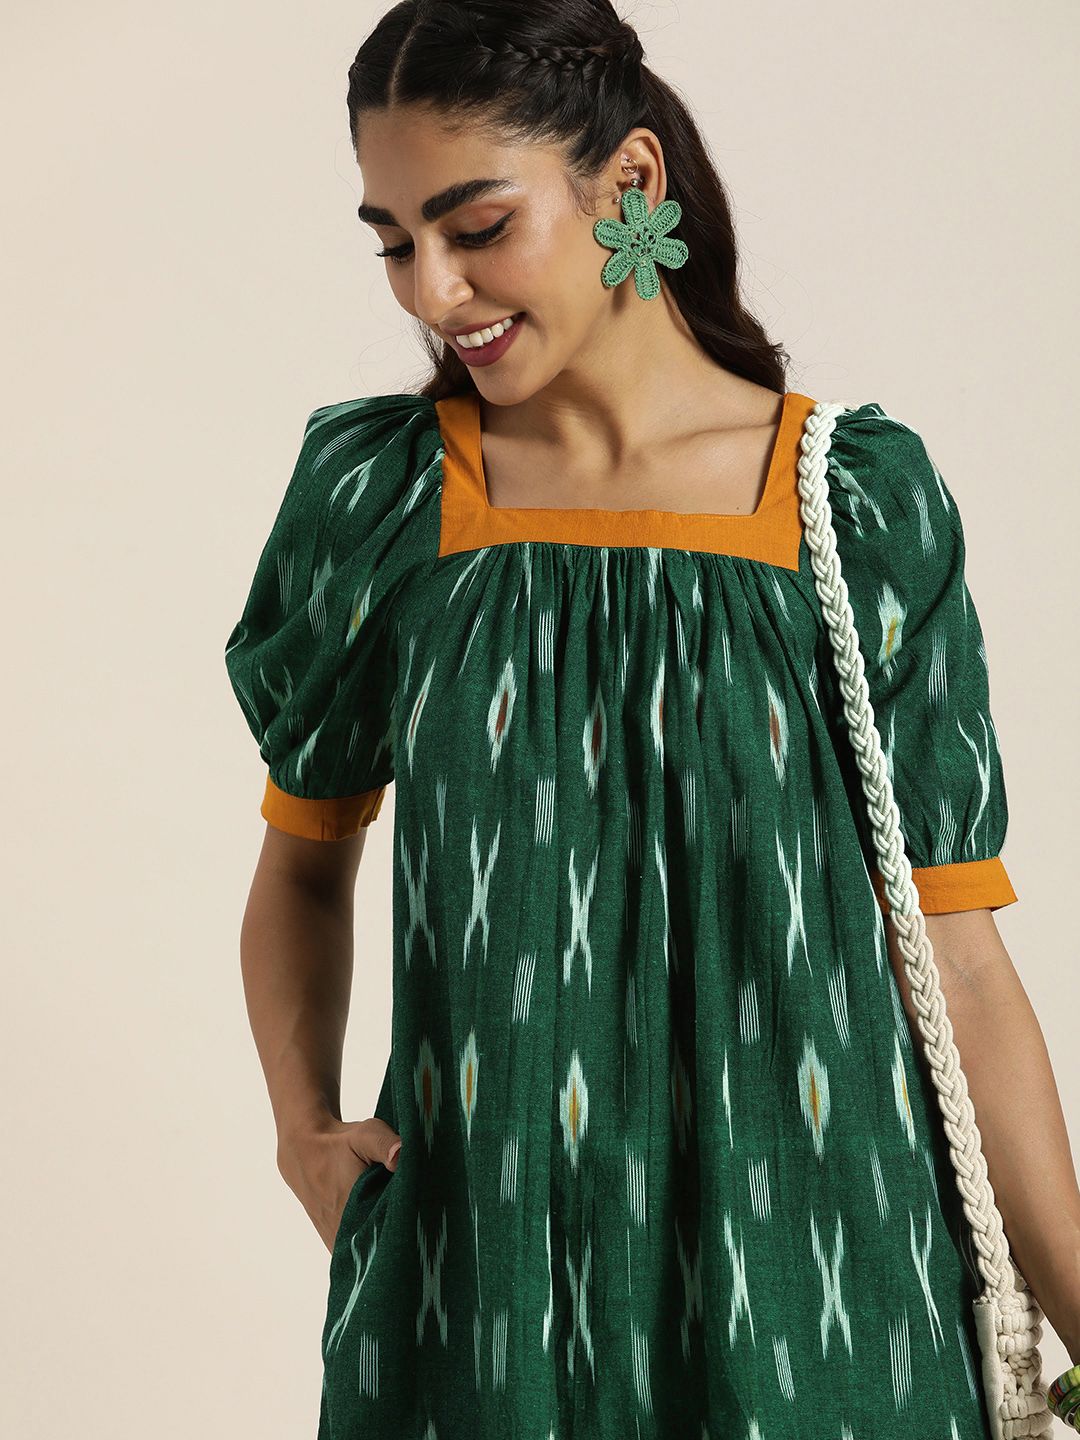 Taavi Green Ikat Printed Ethnic A-Line Dress Price in India